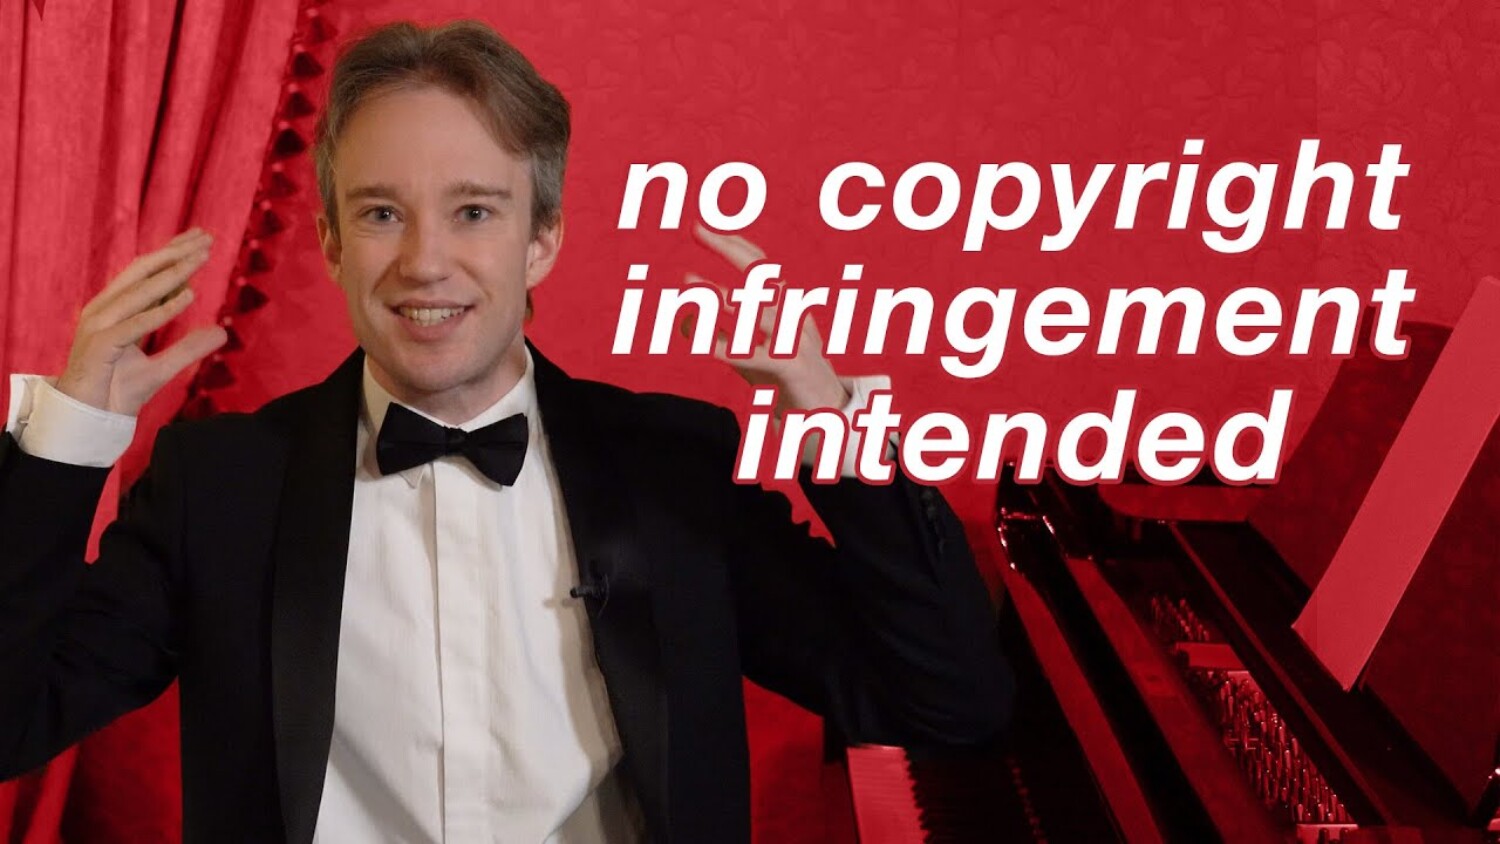 If You Are a Photographer, You Must Watch This Video About Copyright